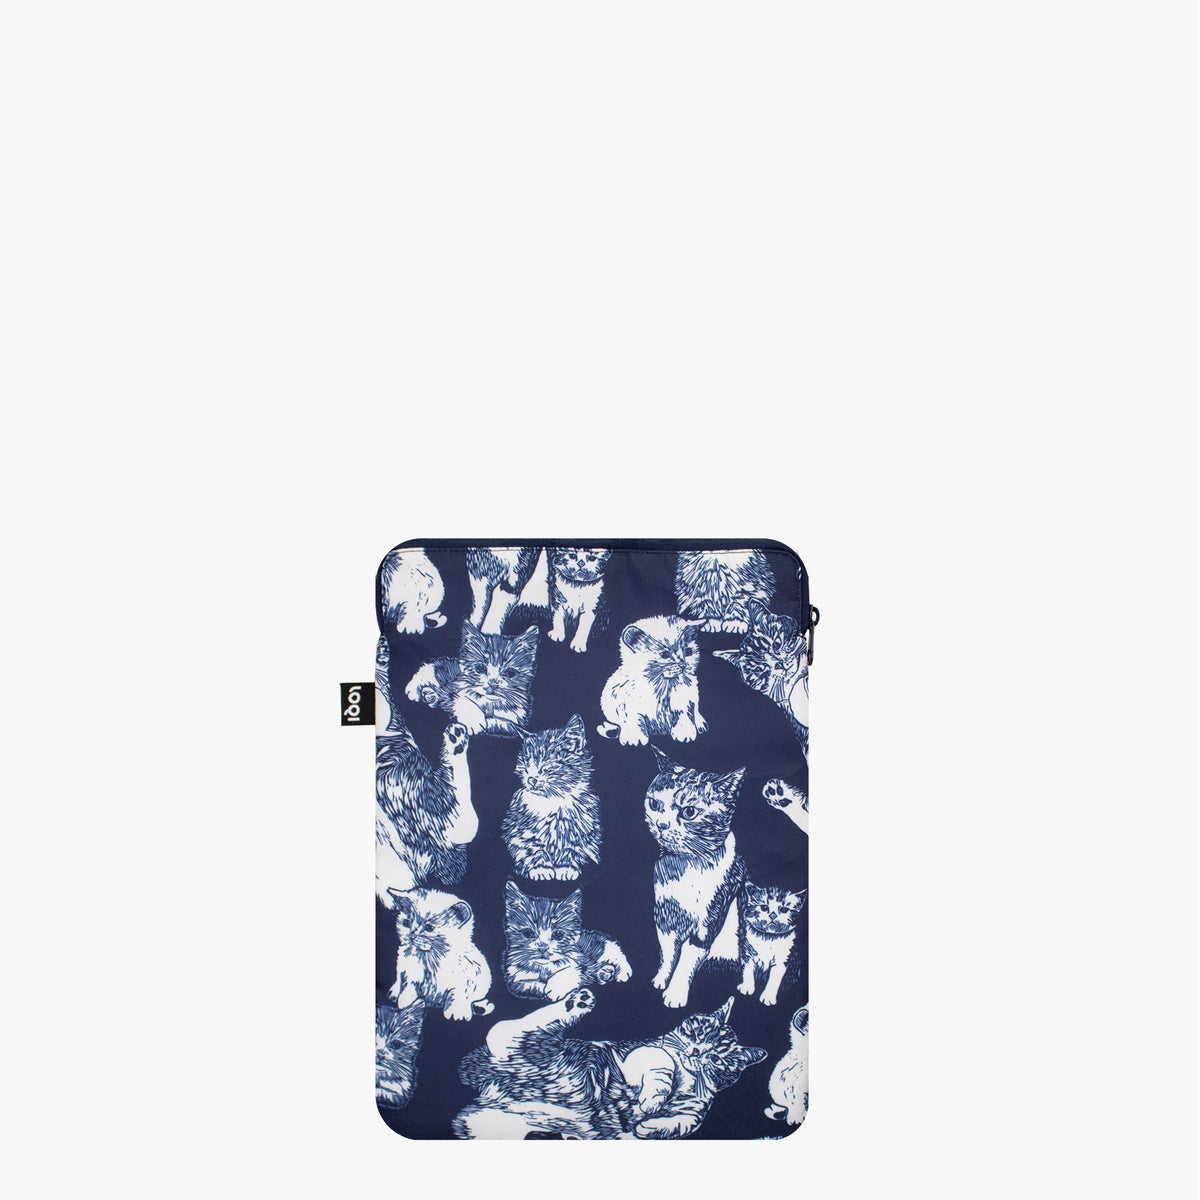 Cats Recycled Laptop Sleeve 24 x 33 cm